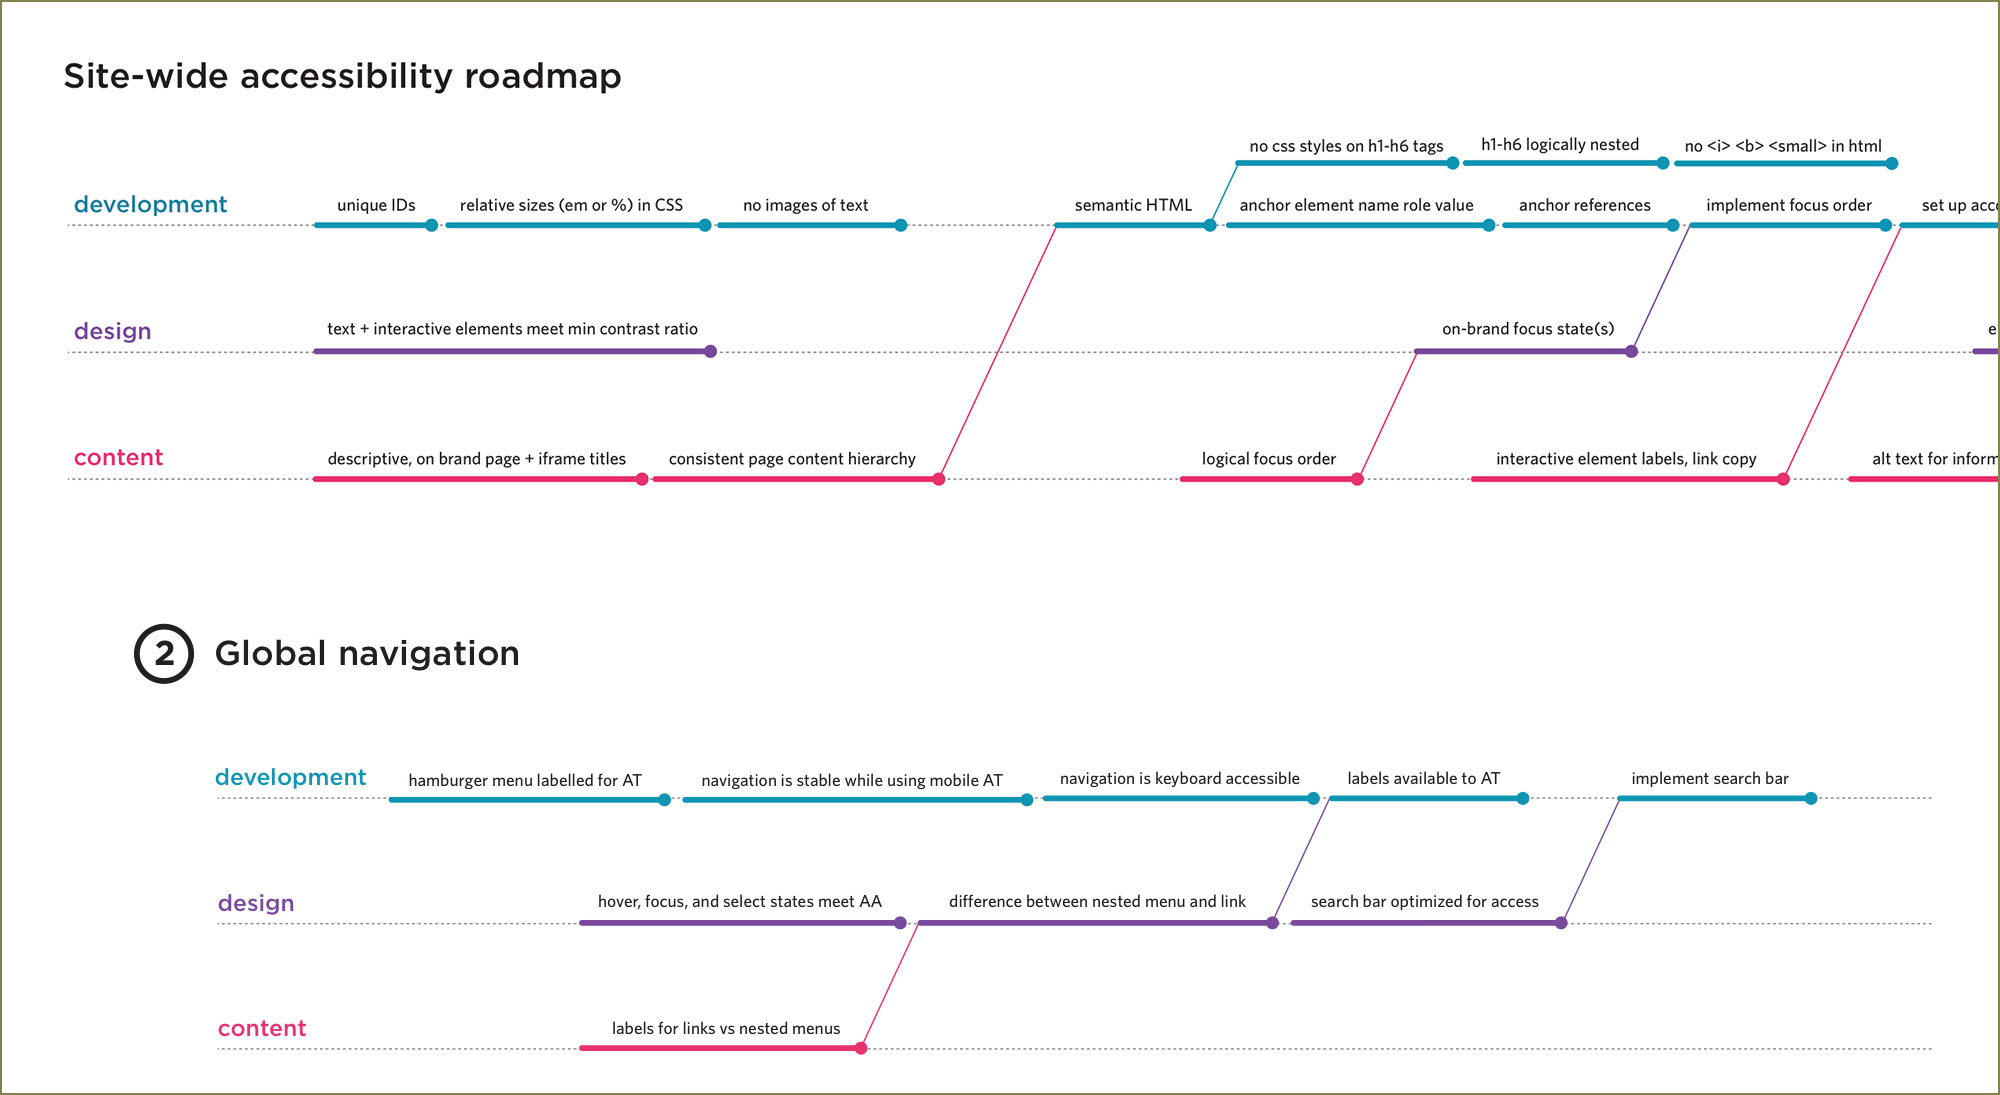 Illustration in the final report detailing an accessibility roadmap to make the website accessible, divided into development, design, and content lanes.